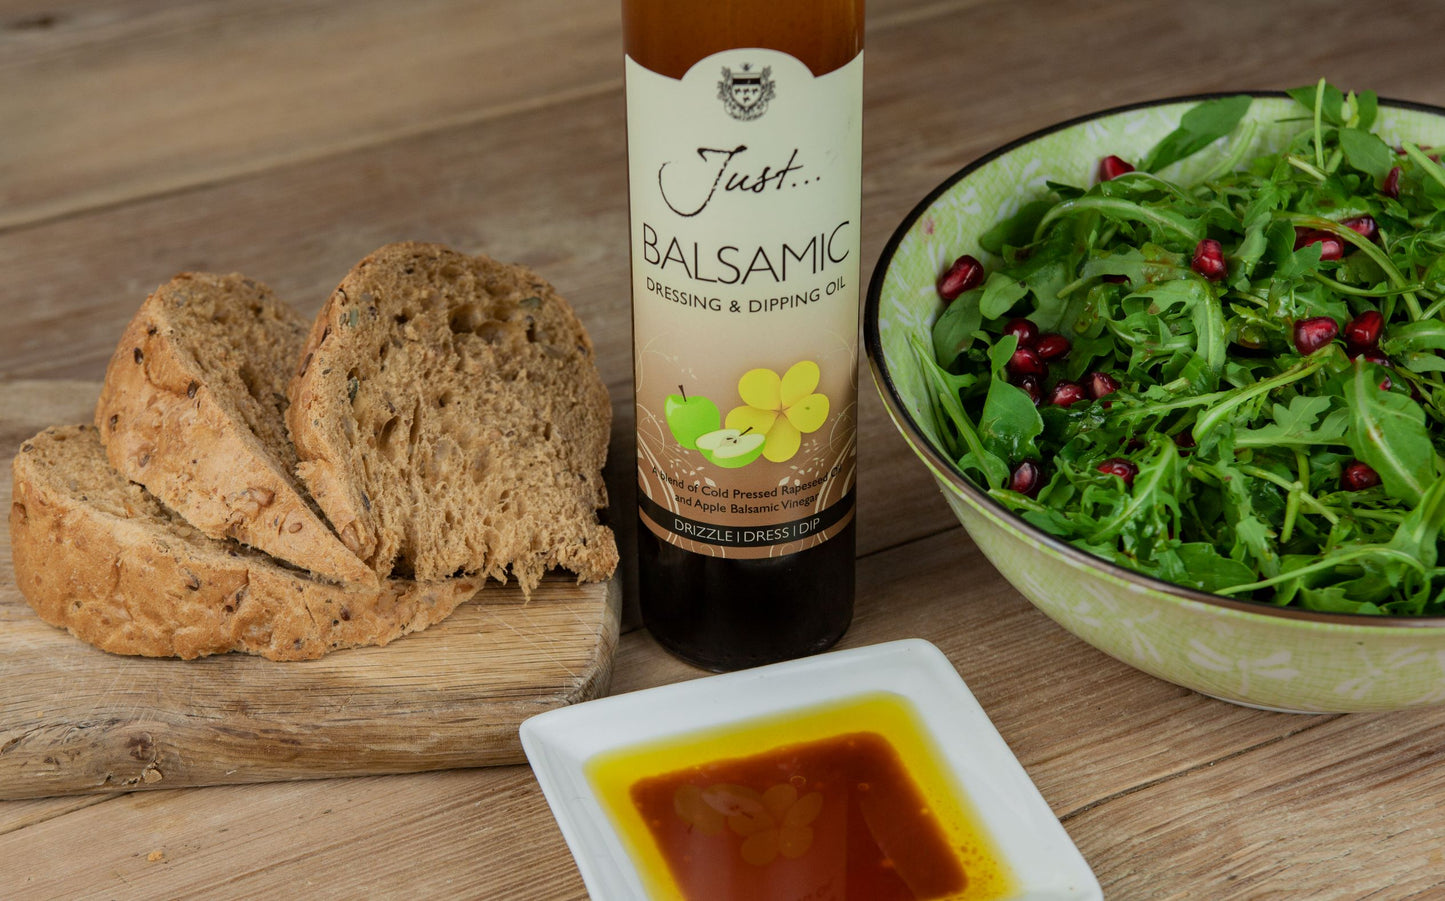 Balsamic Dressing and Dipping Oil